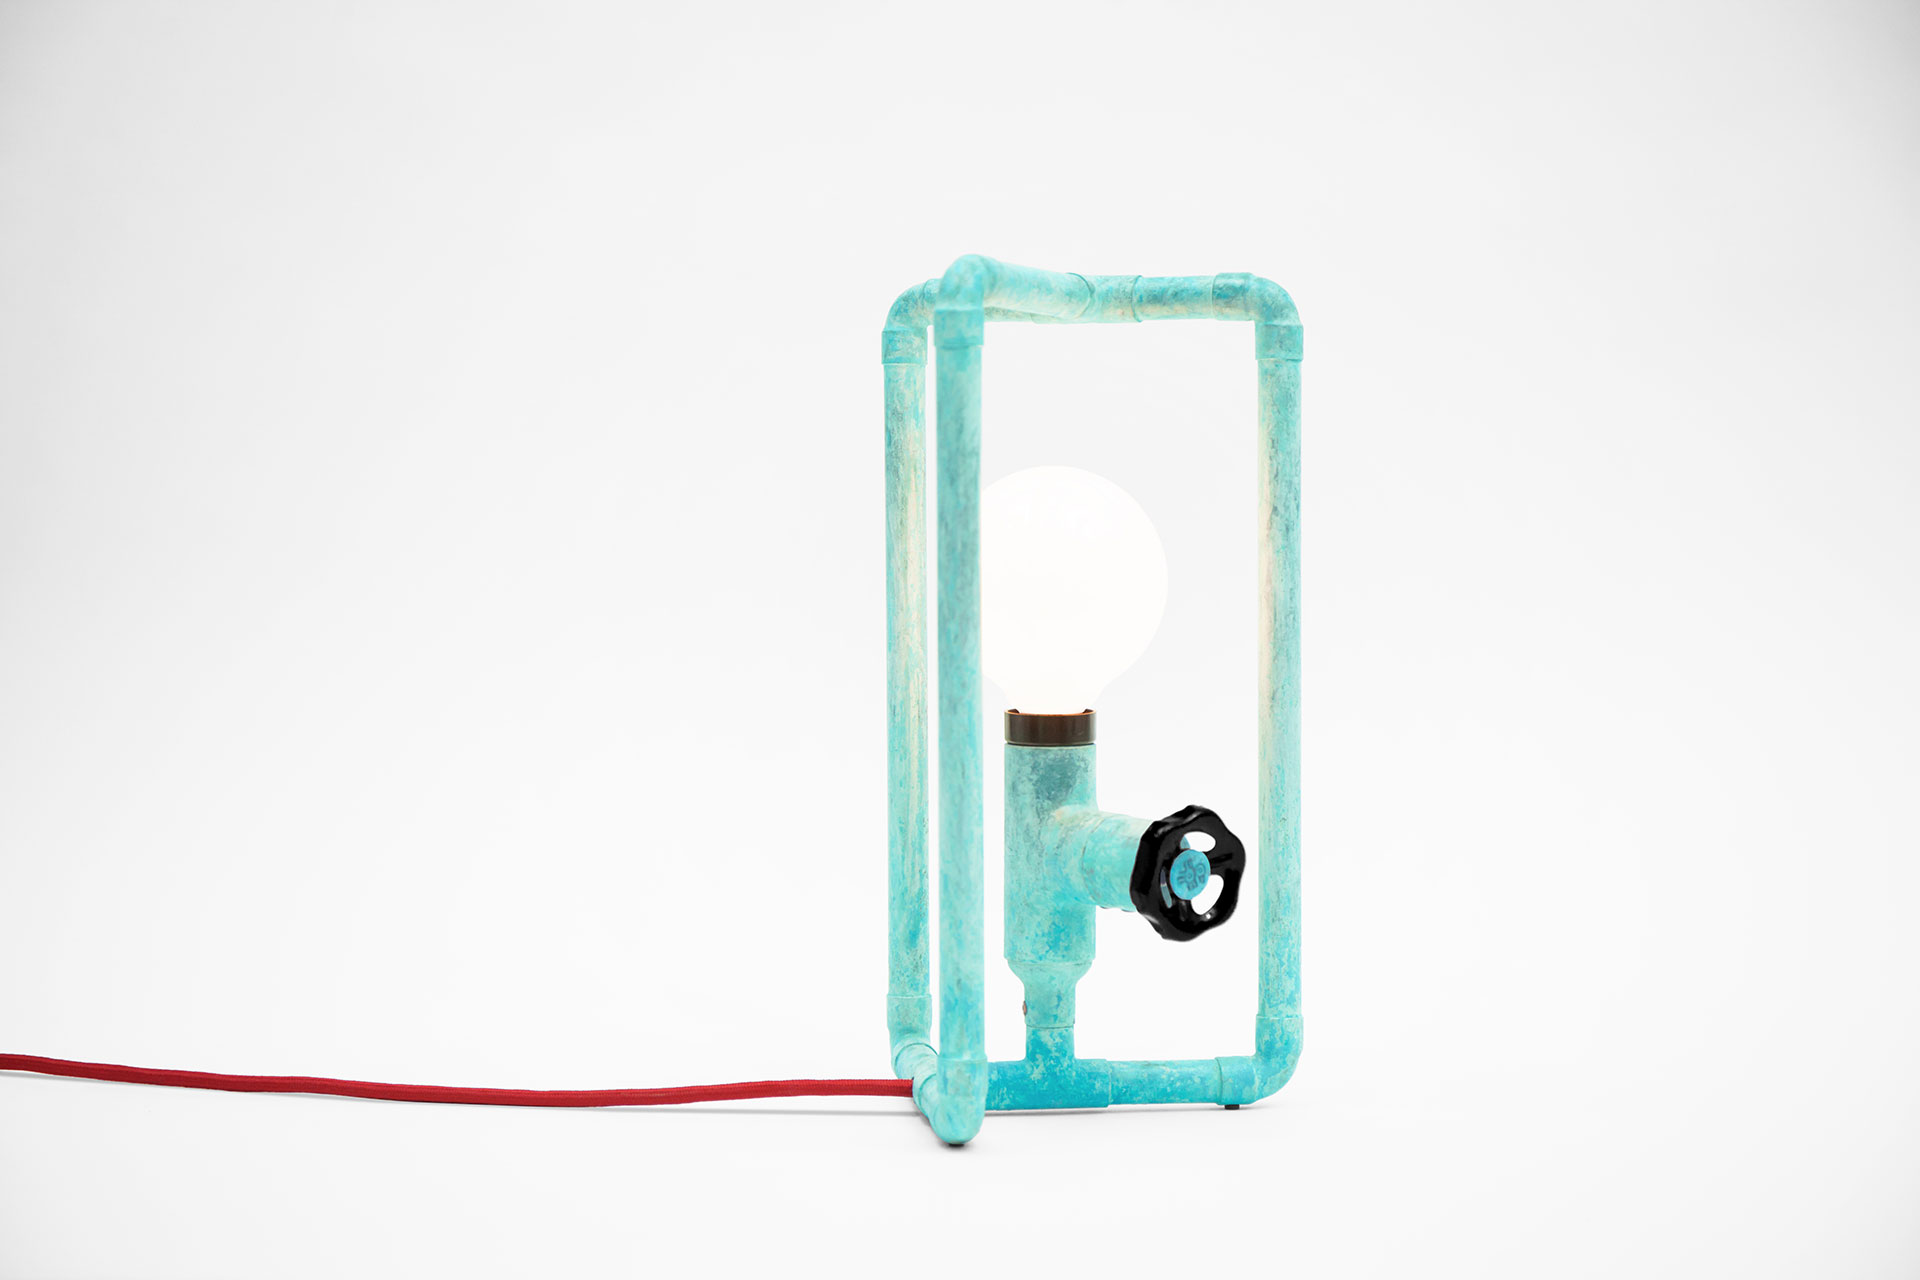 Gadget table lamp in turquoise color with funny knob dimmer inspired by industrial design